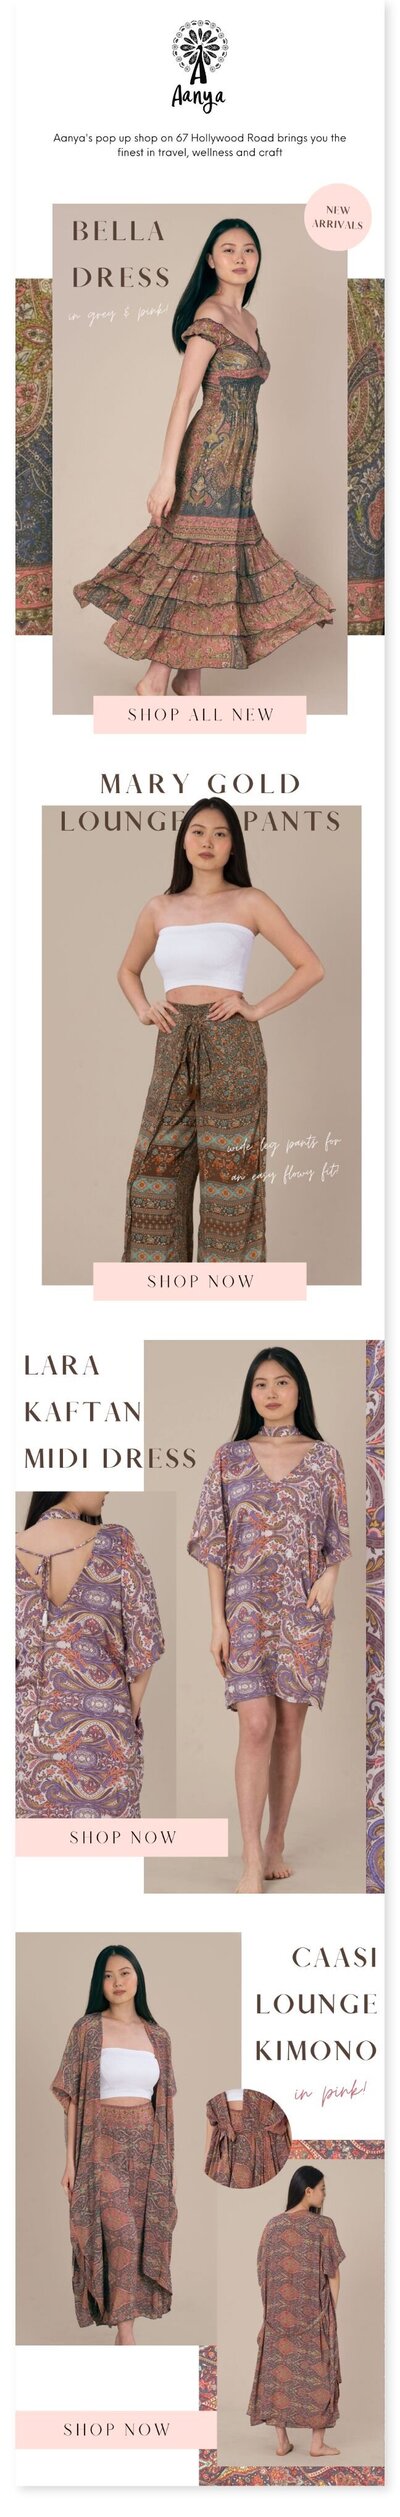 E-commerce Email Campaign Design for Aanya’s New Clothing Arrivals by Fashion Graphic Designer in Hong Kong, Kyra Janelle.